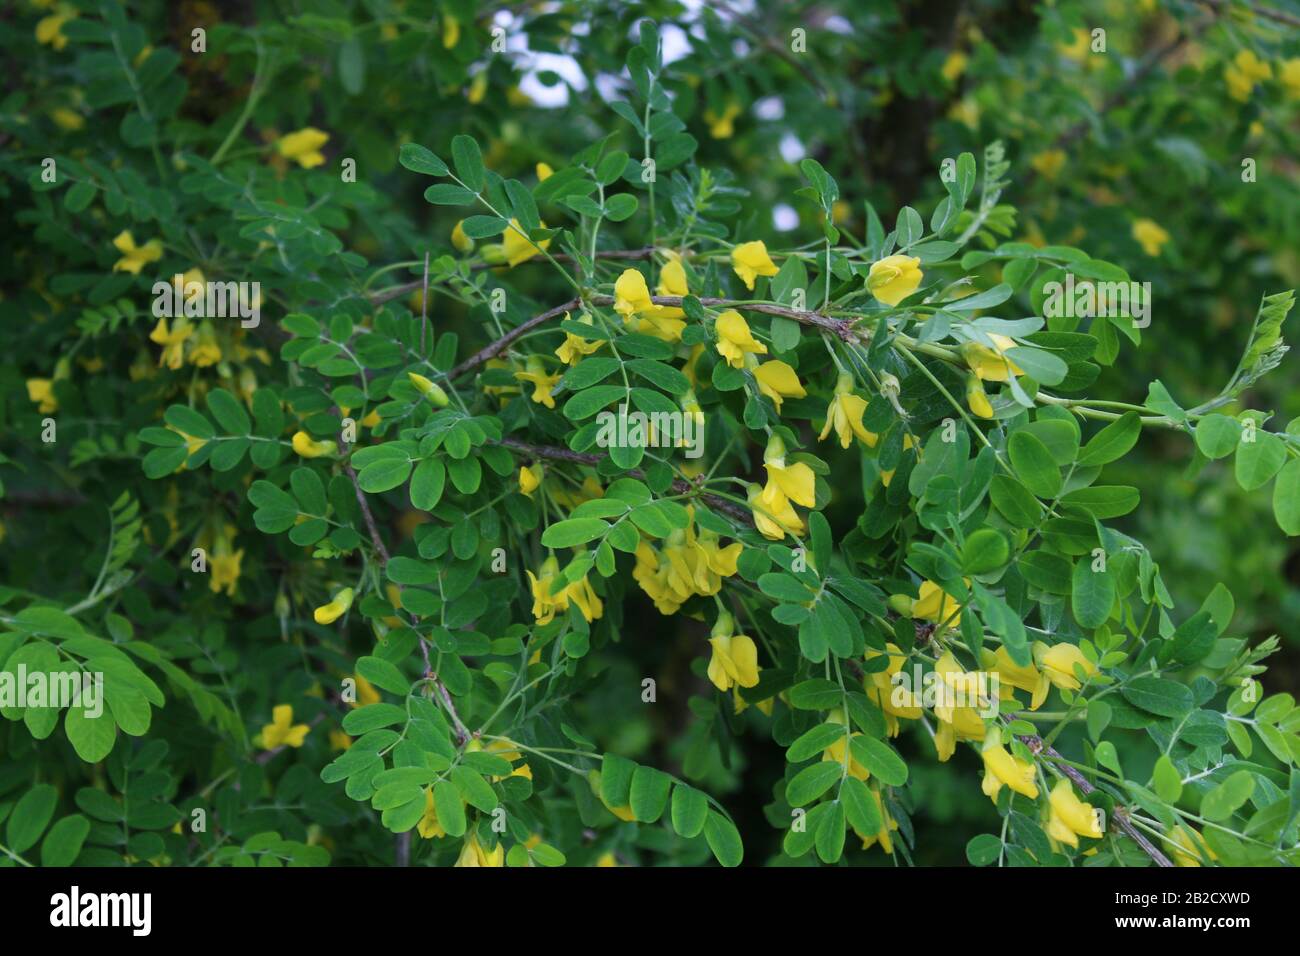 The picture shows bladder senna in the garden Stock Photo